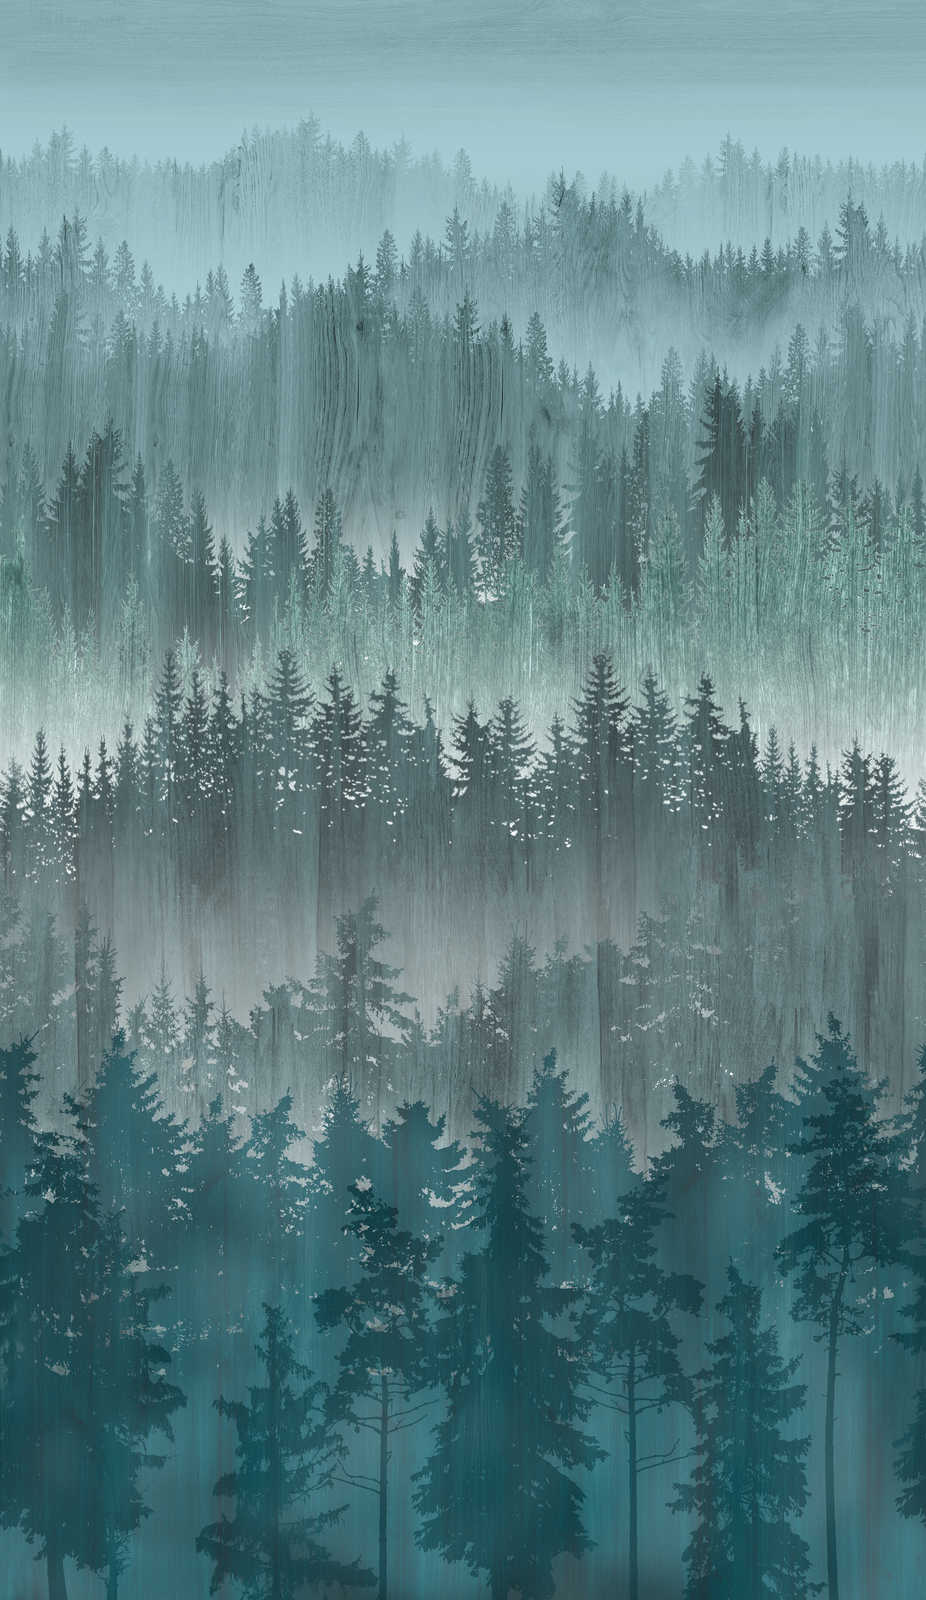             Non-woven wallpaper with abstract forest pattern - blue, grey, petrol
        